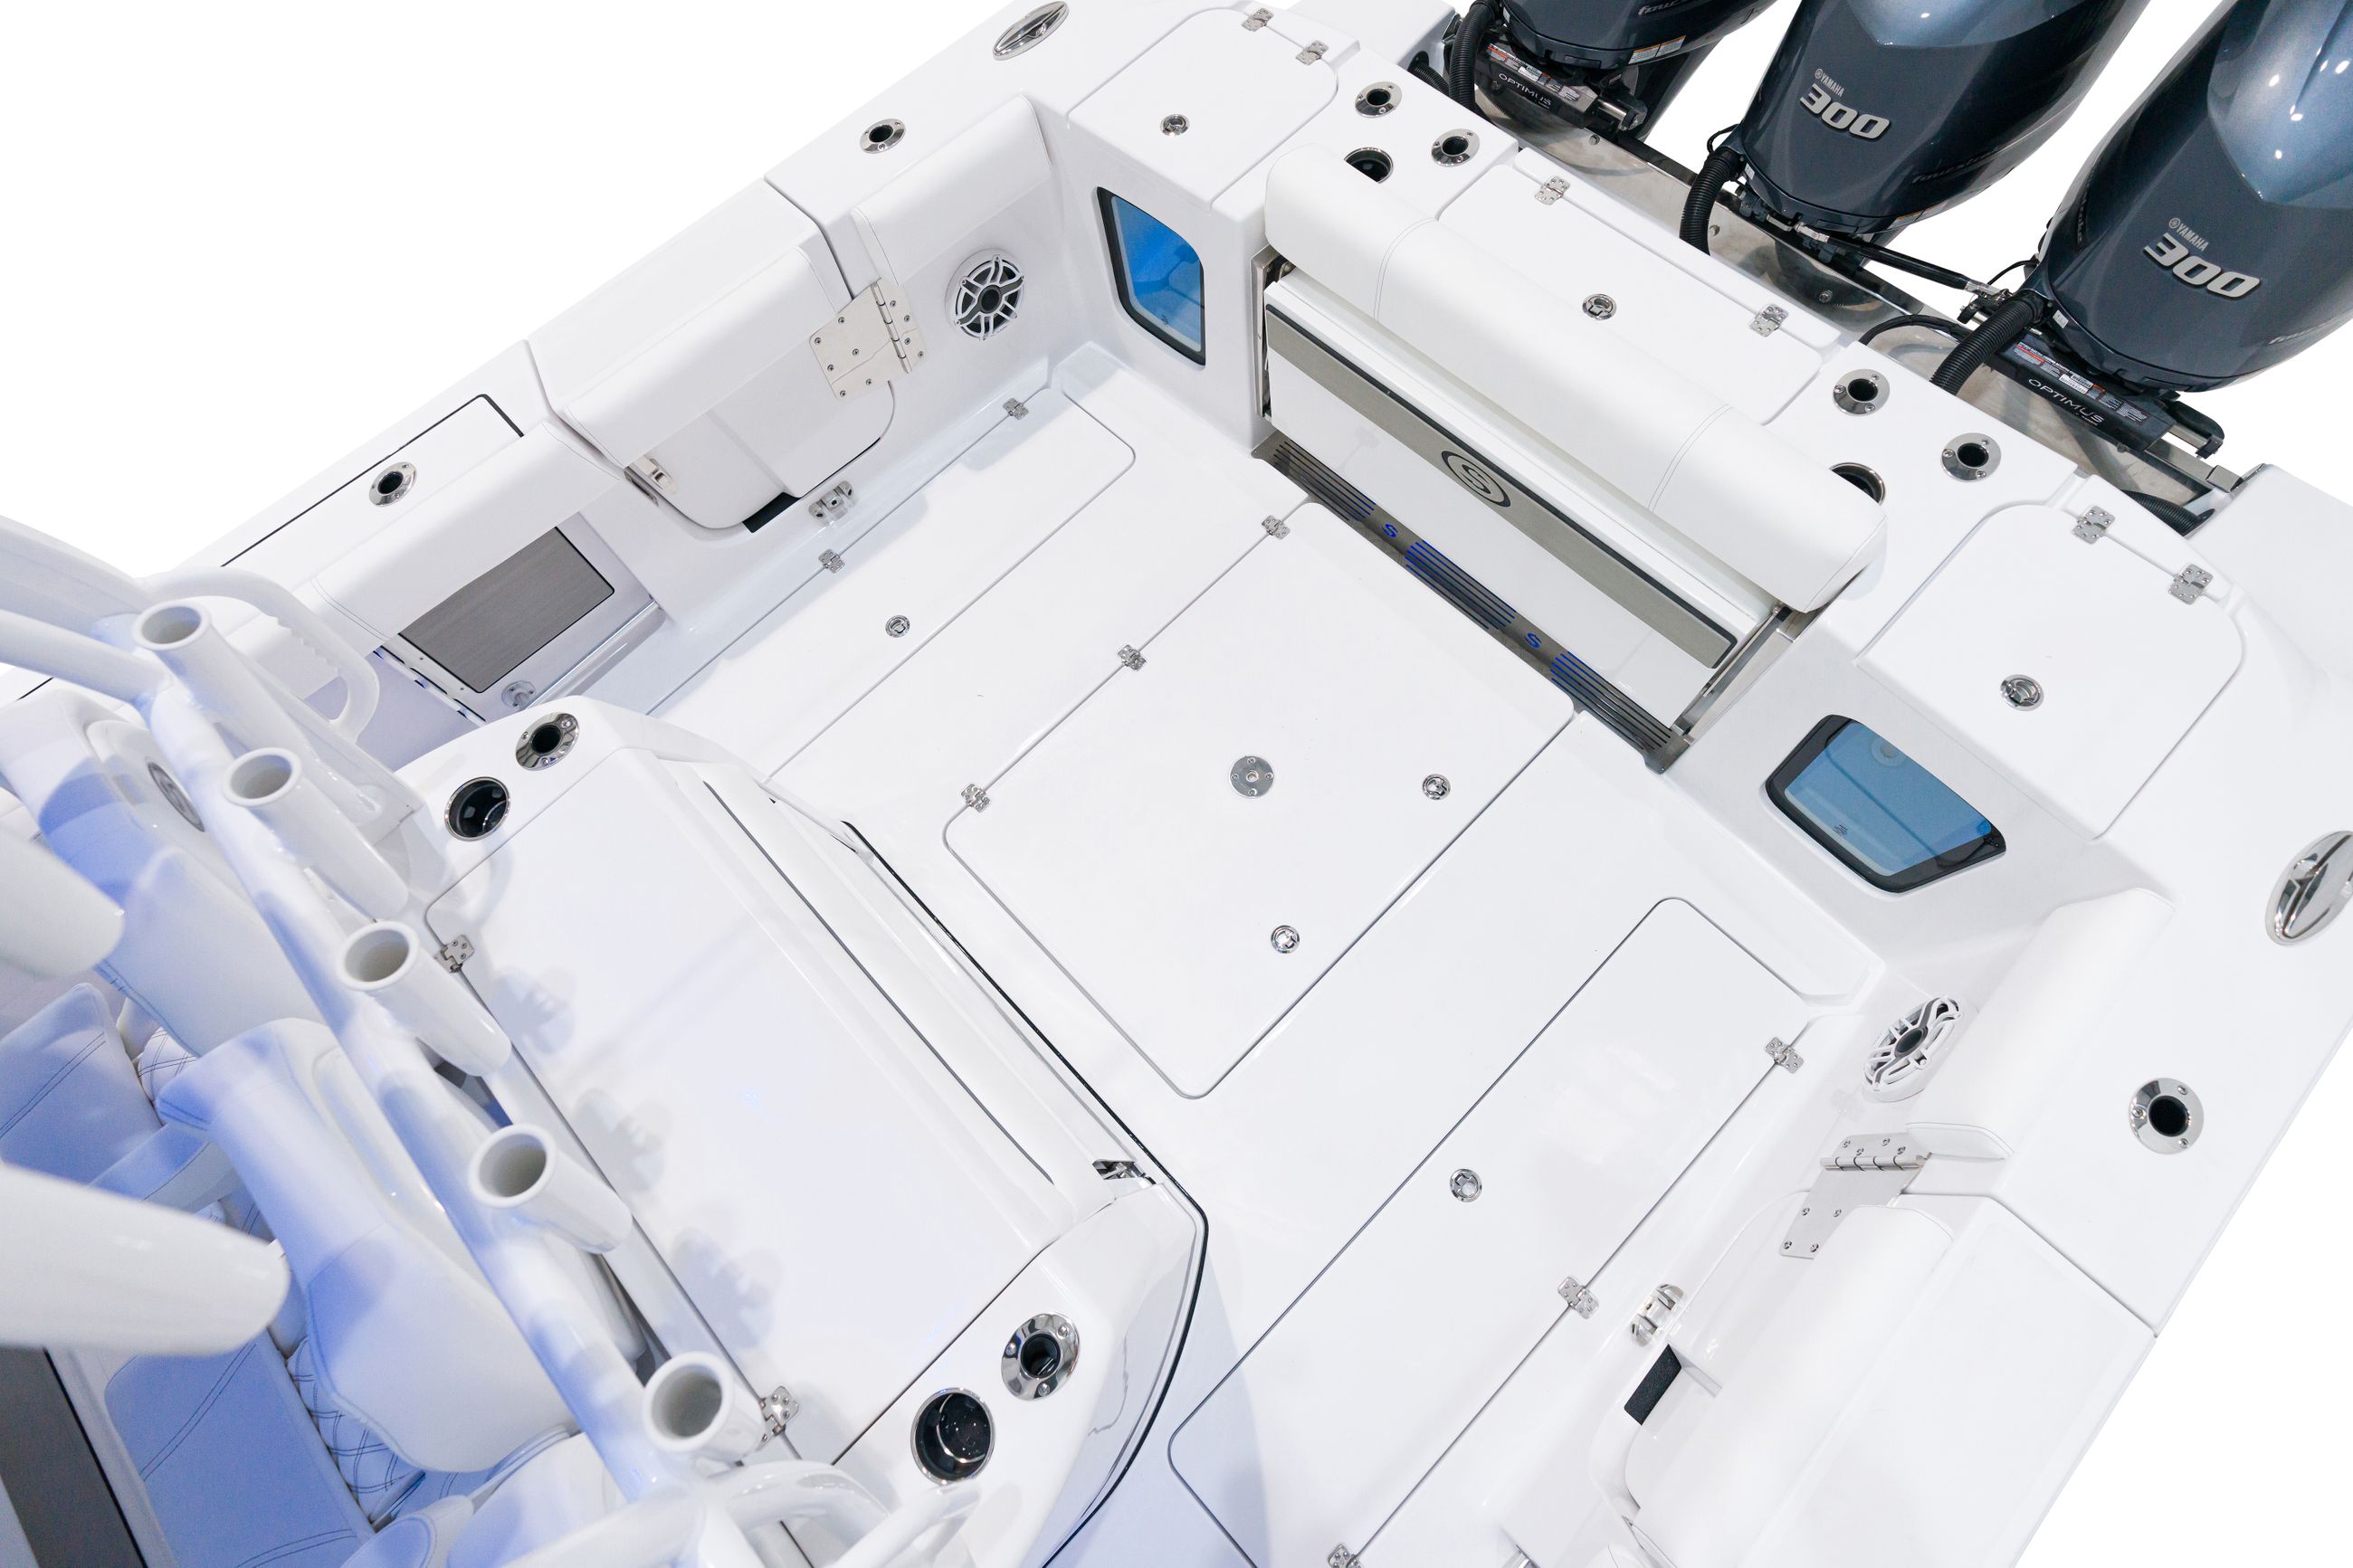 Detail image of Total Access Compartment